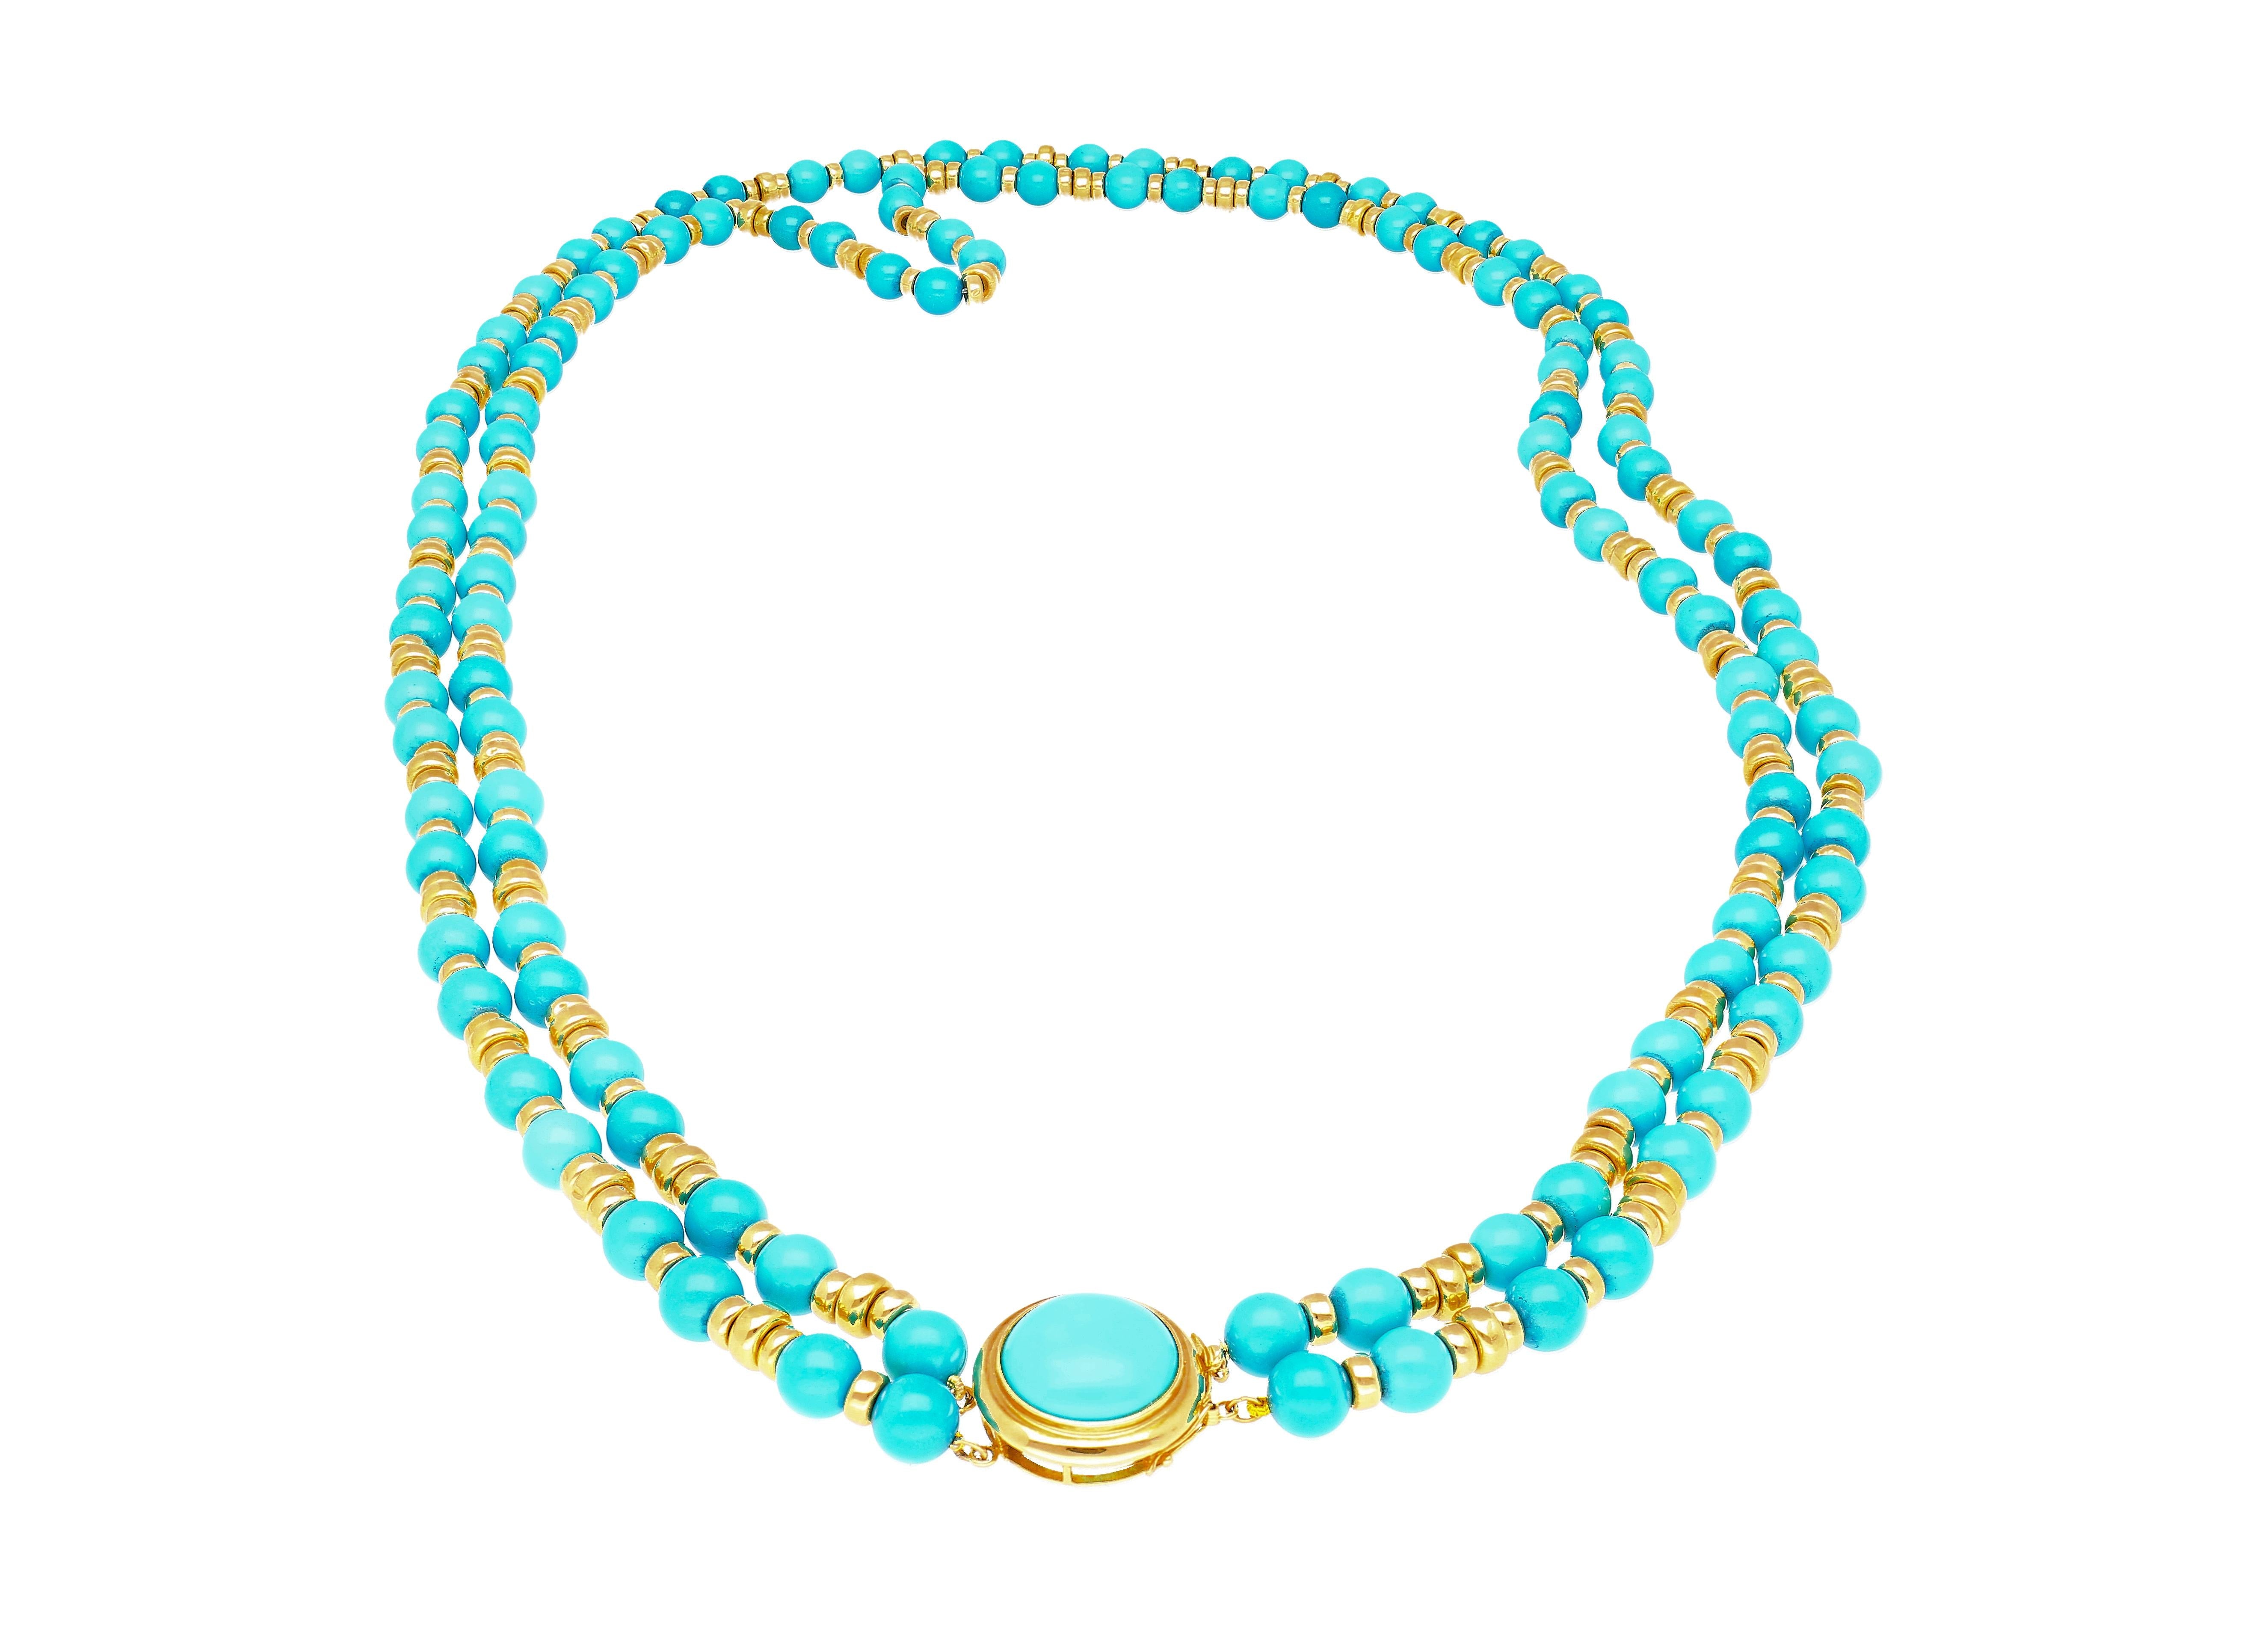 Vintage Turquoise and 14k Gold Bead & Pendant Necklace